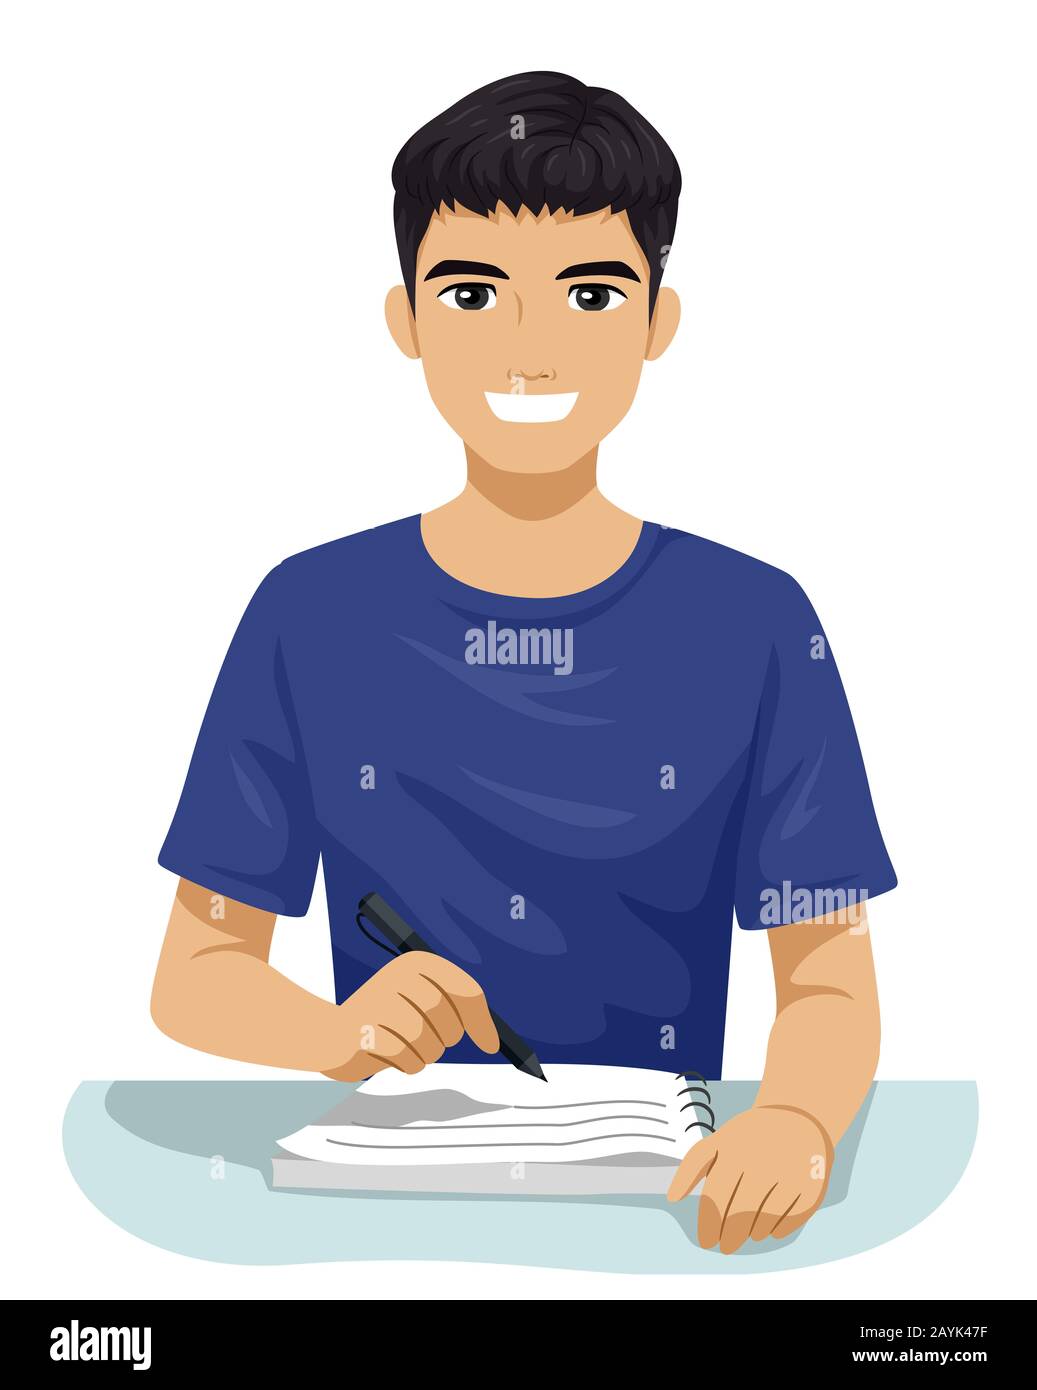 Illustration of a South East Asian Teenage Guy Student Writing Notes and Studying Stock Photo